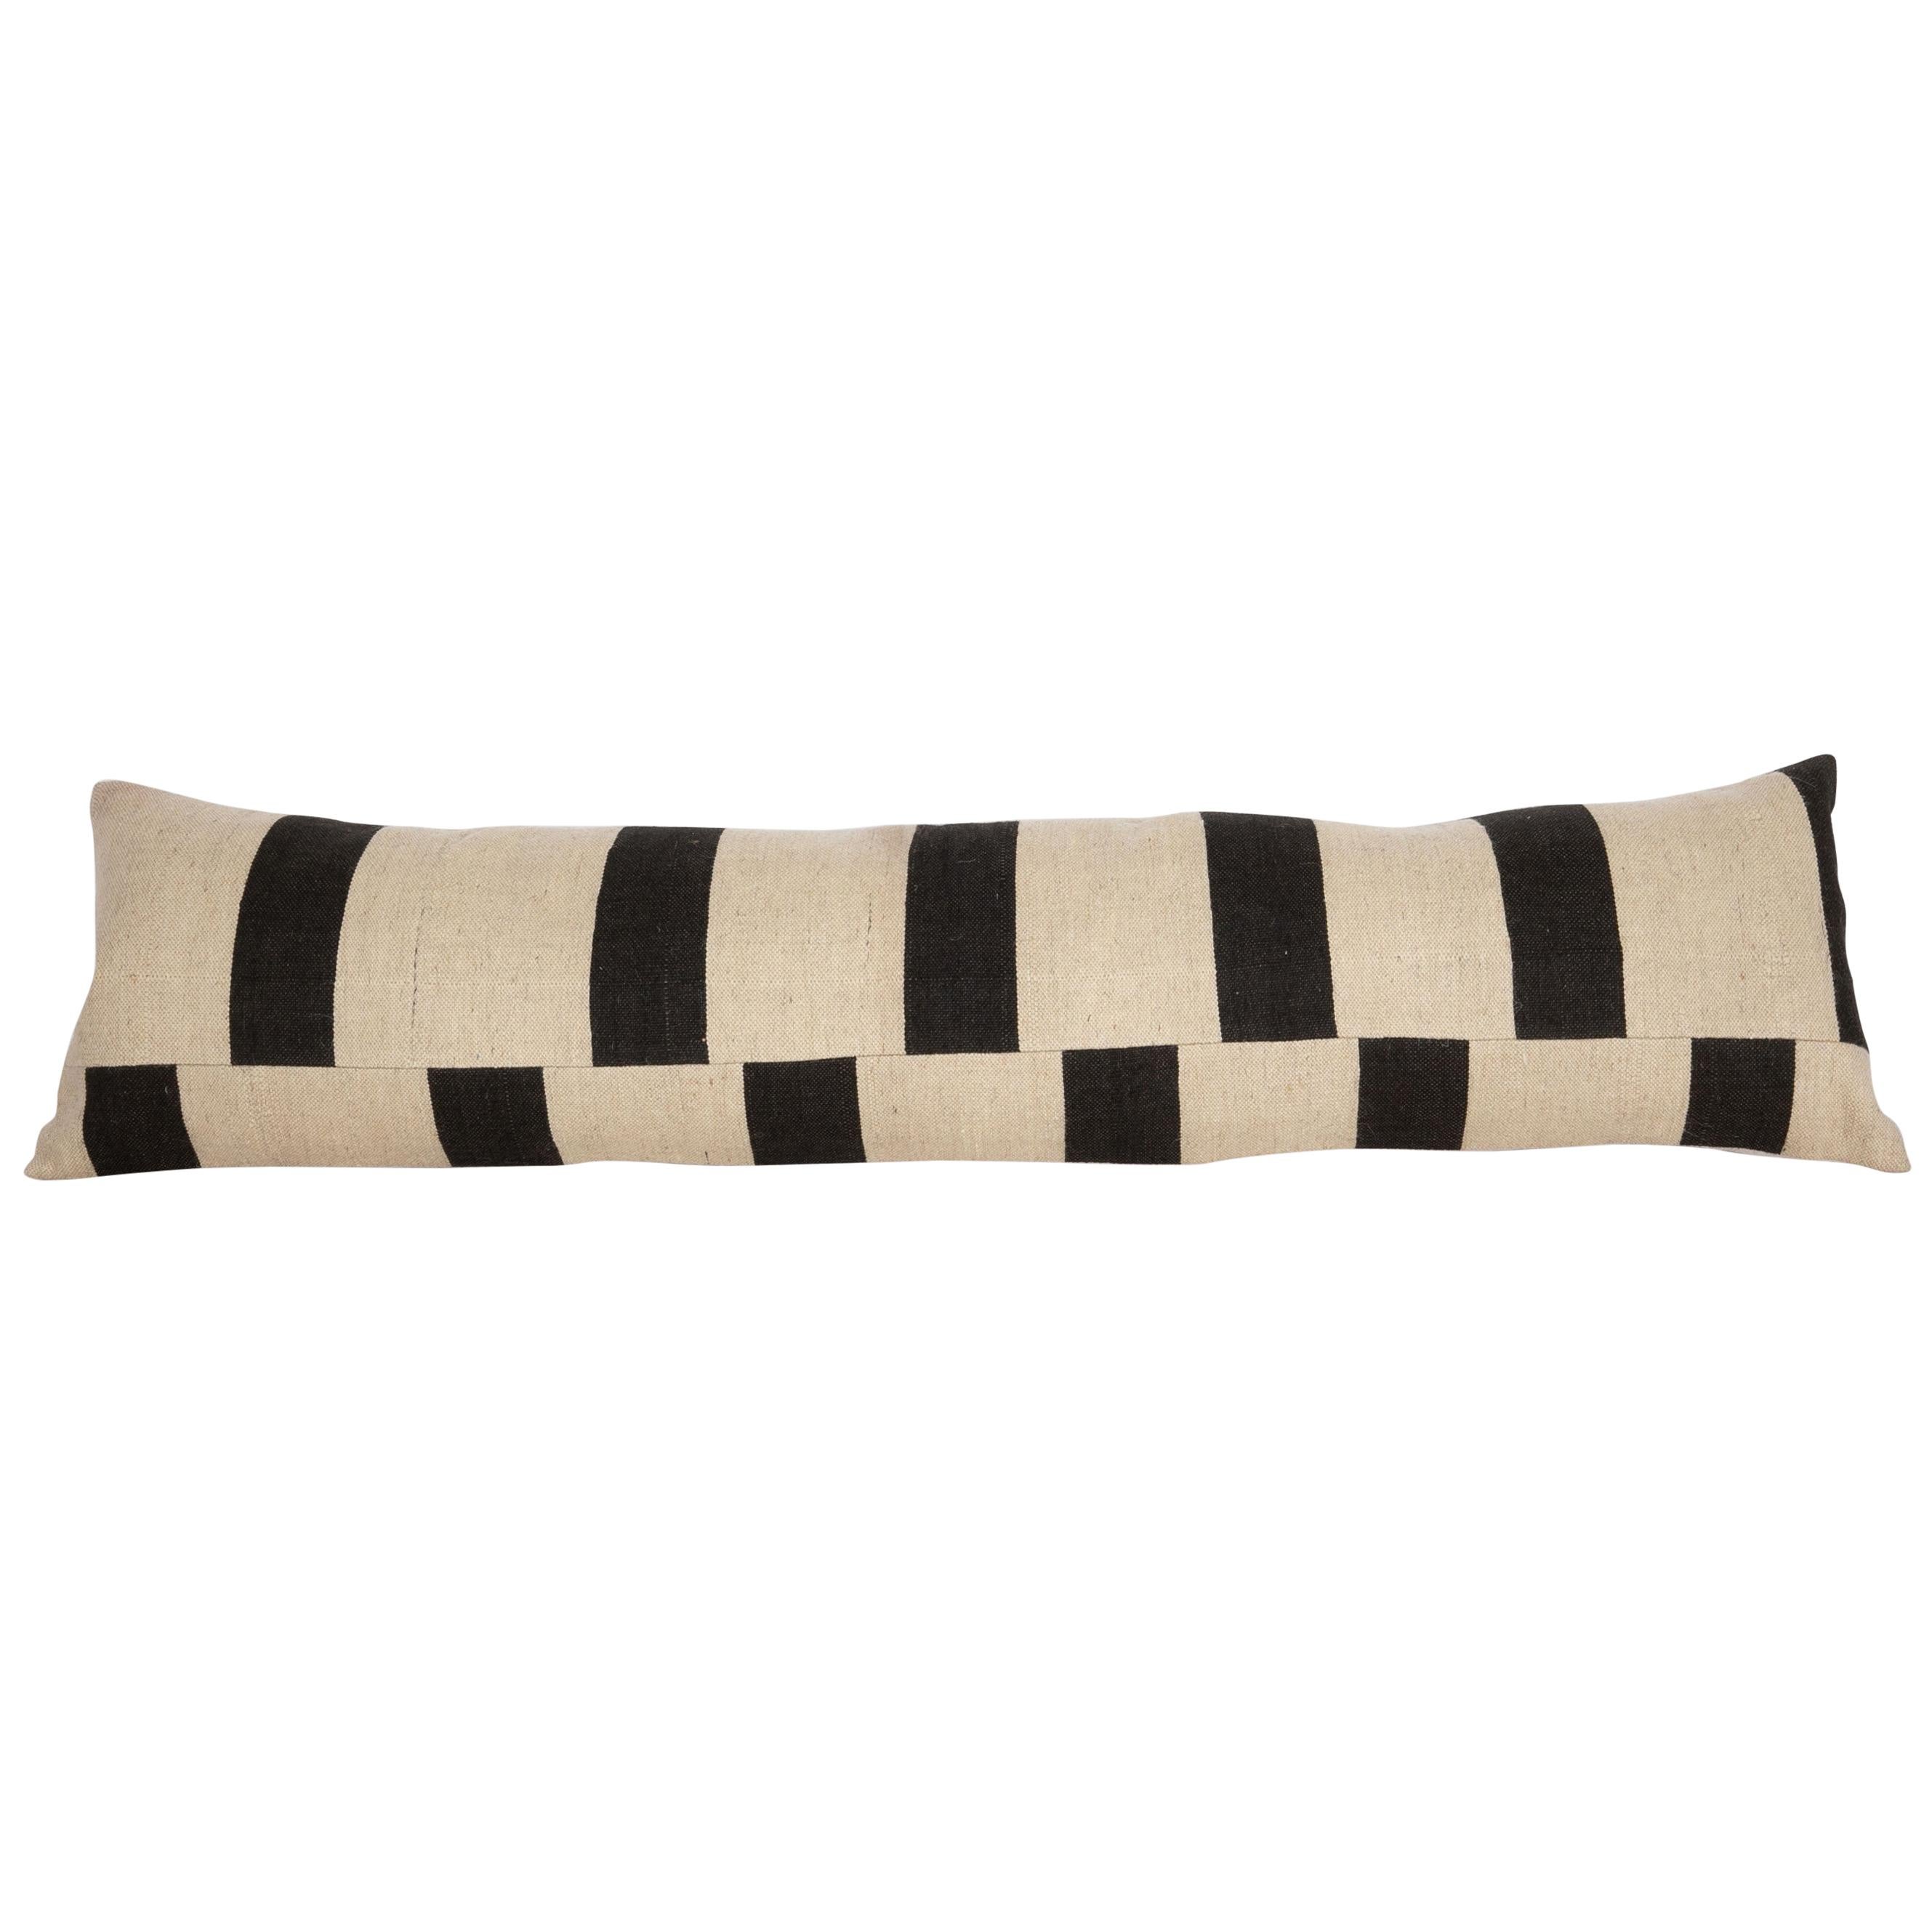 Lumbar Pillow Case Fashioned from Contemporary Weaving